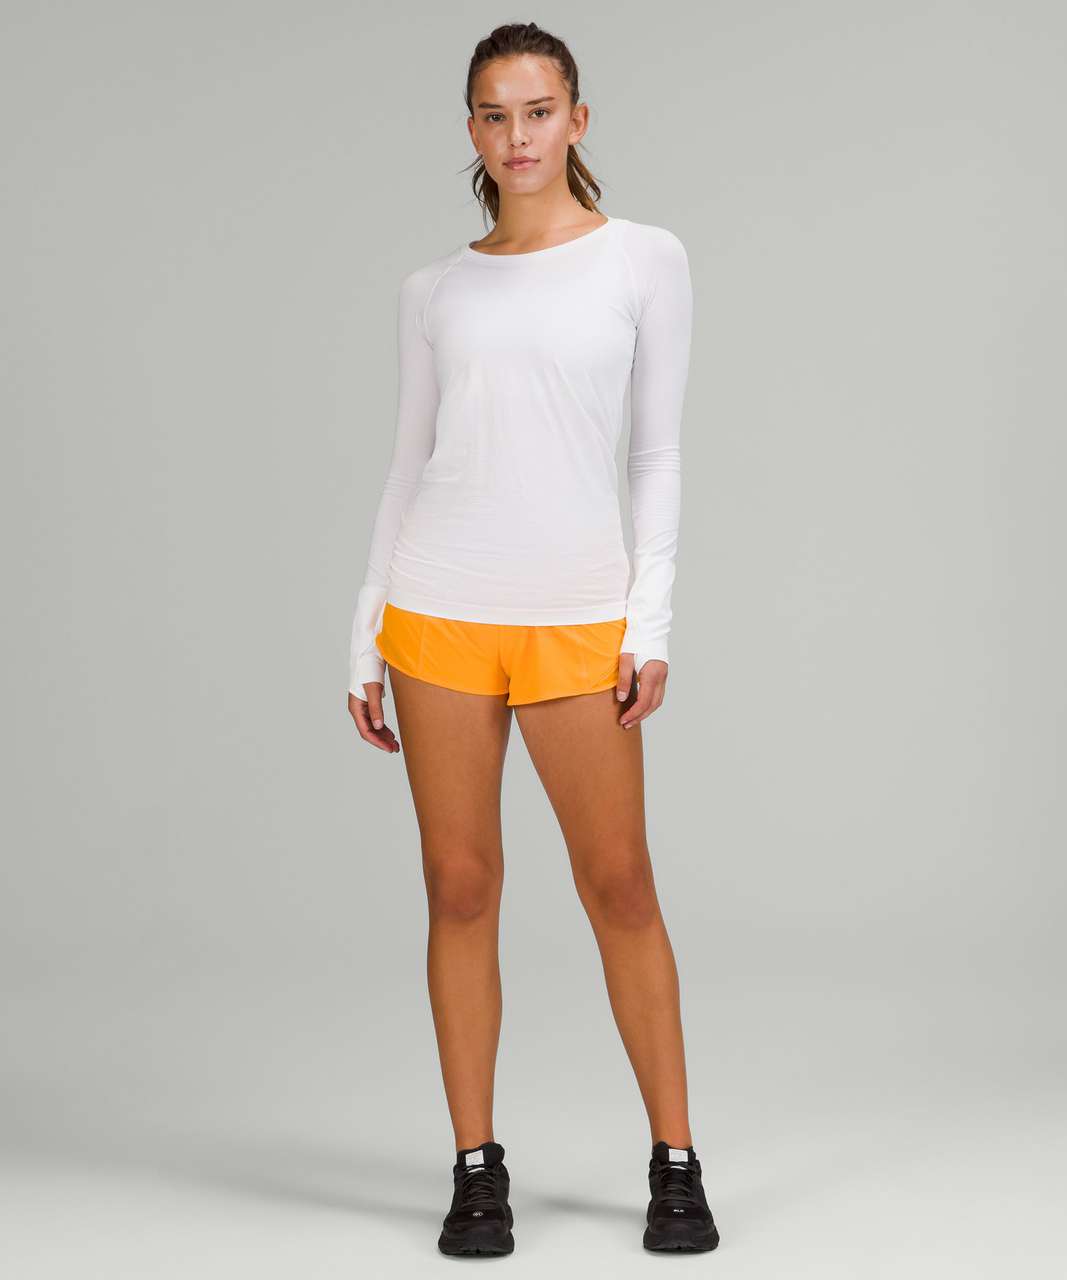 Lululemon Hotty Hot Low-Rise Lined Short 2.5" - Clementine